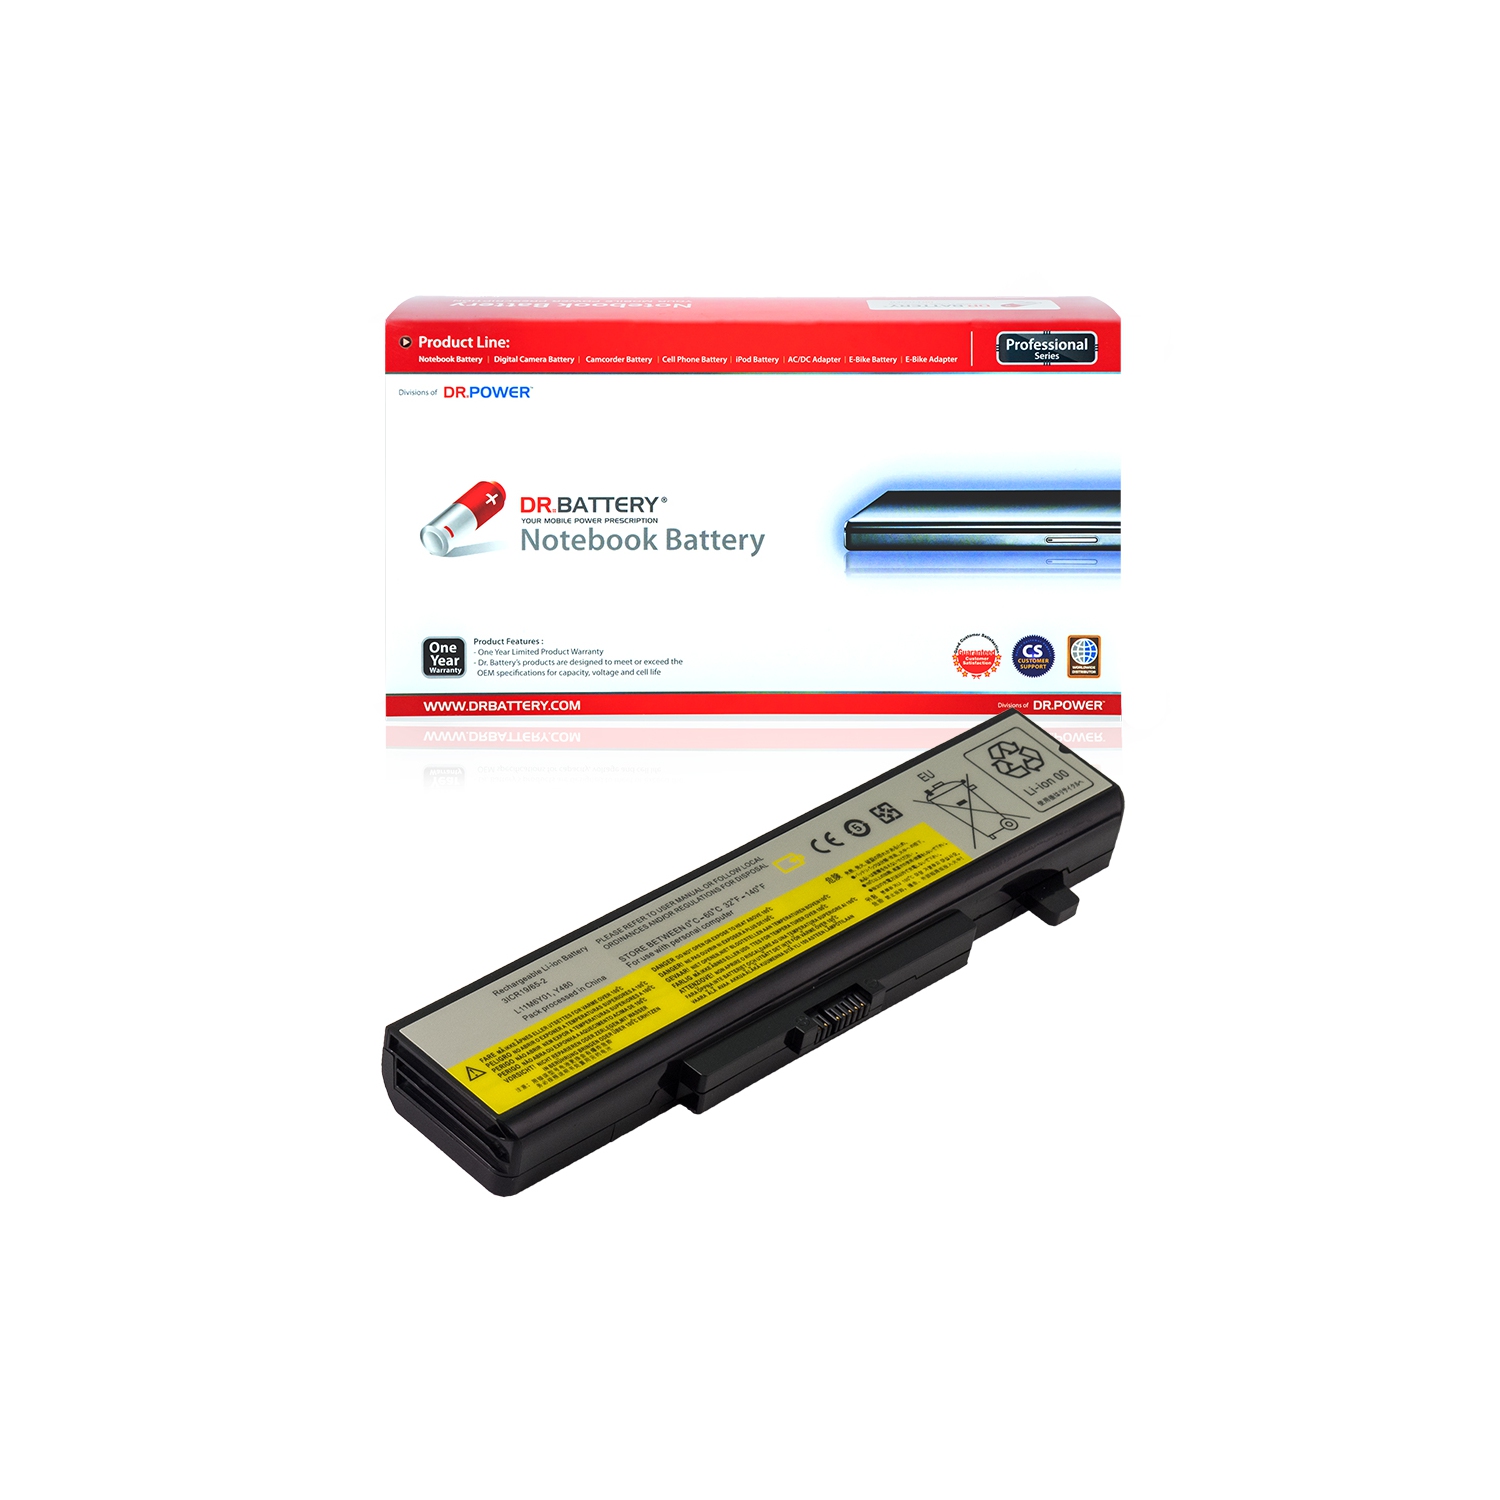 DR. BATTERY - Replacement for Lenovo Essential G580 / G585 / B580 / B590 / 121500049 / 121500050 / 121500052 / 121500053